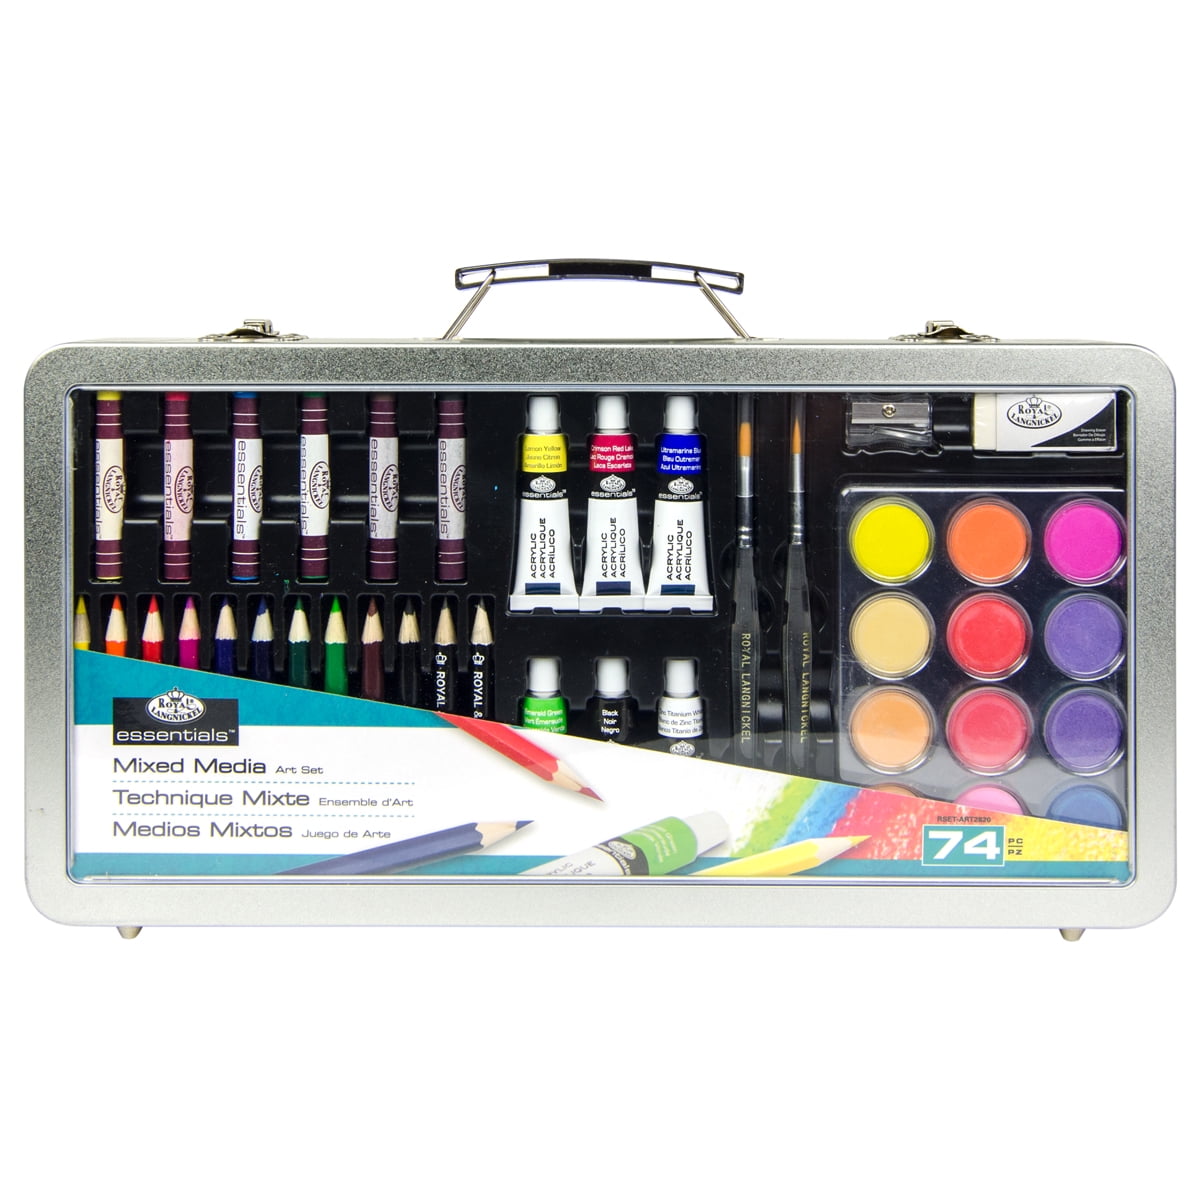 126pc Mixed Media Art Set in Carrying Case - Paint Sets - Art Supplies & Painting